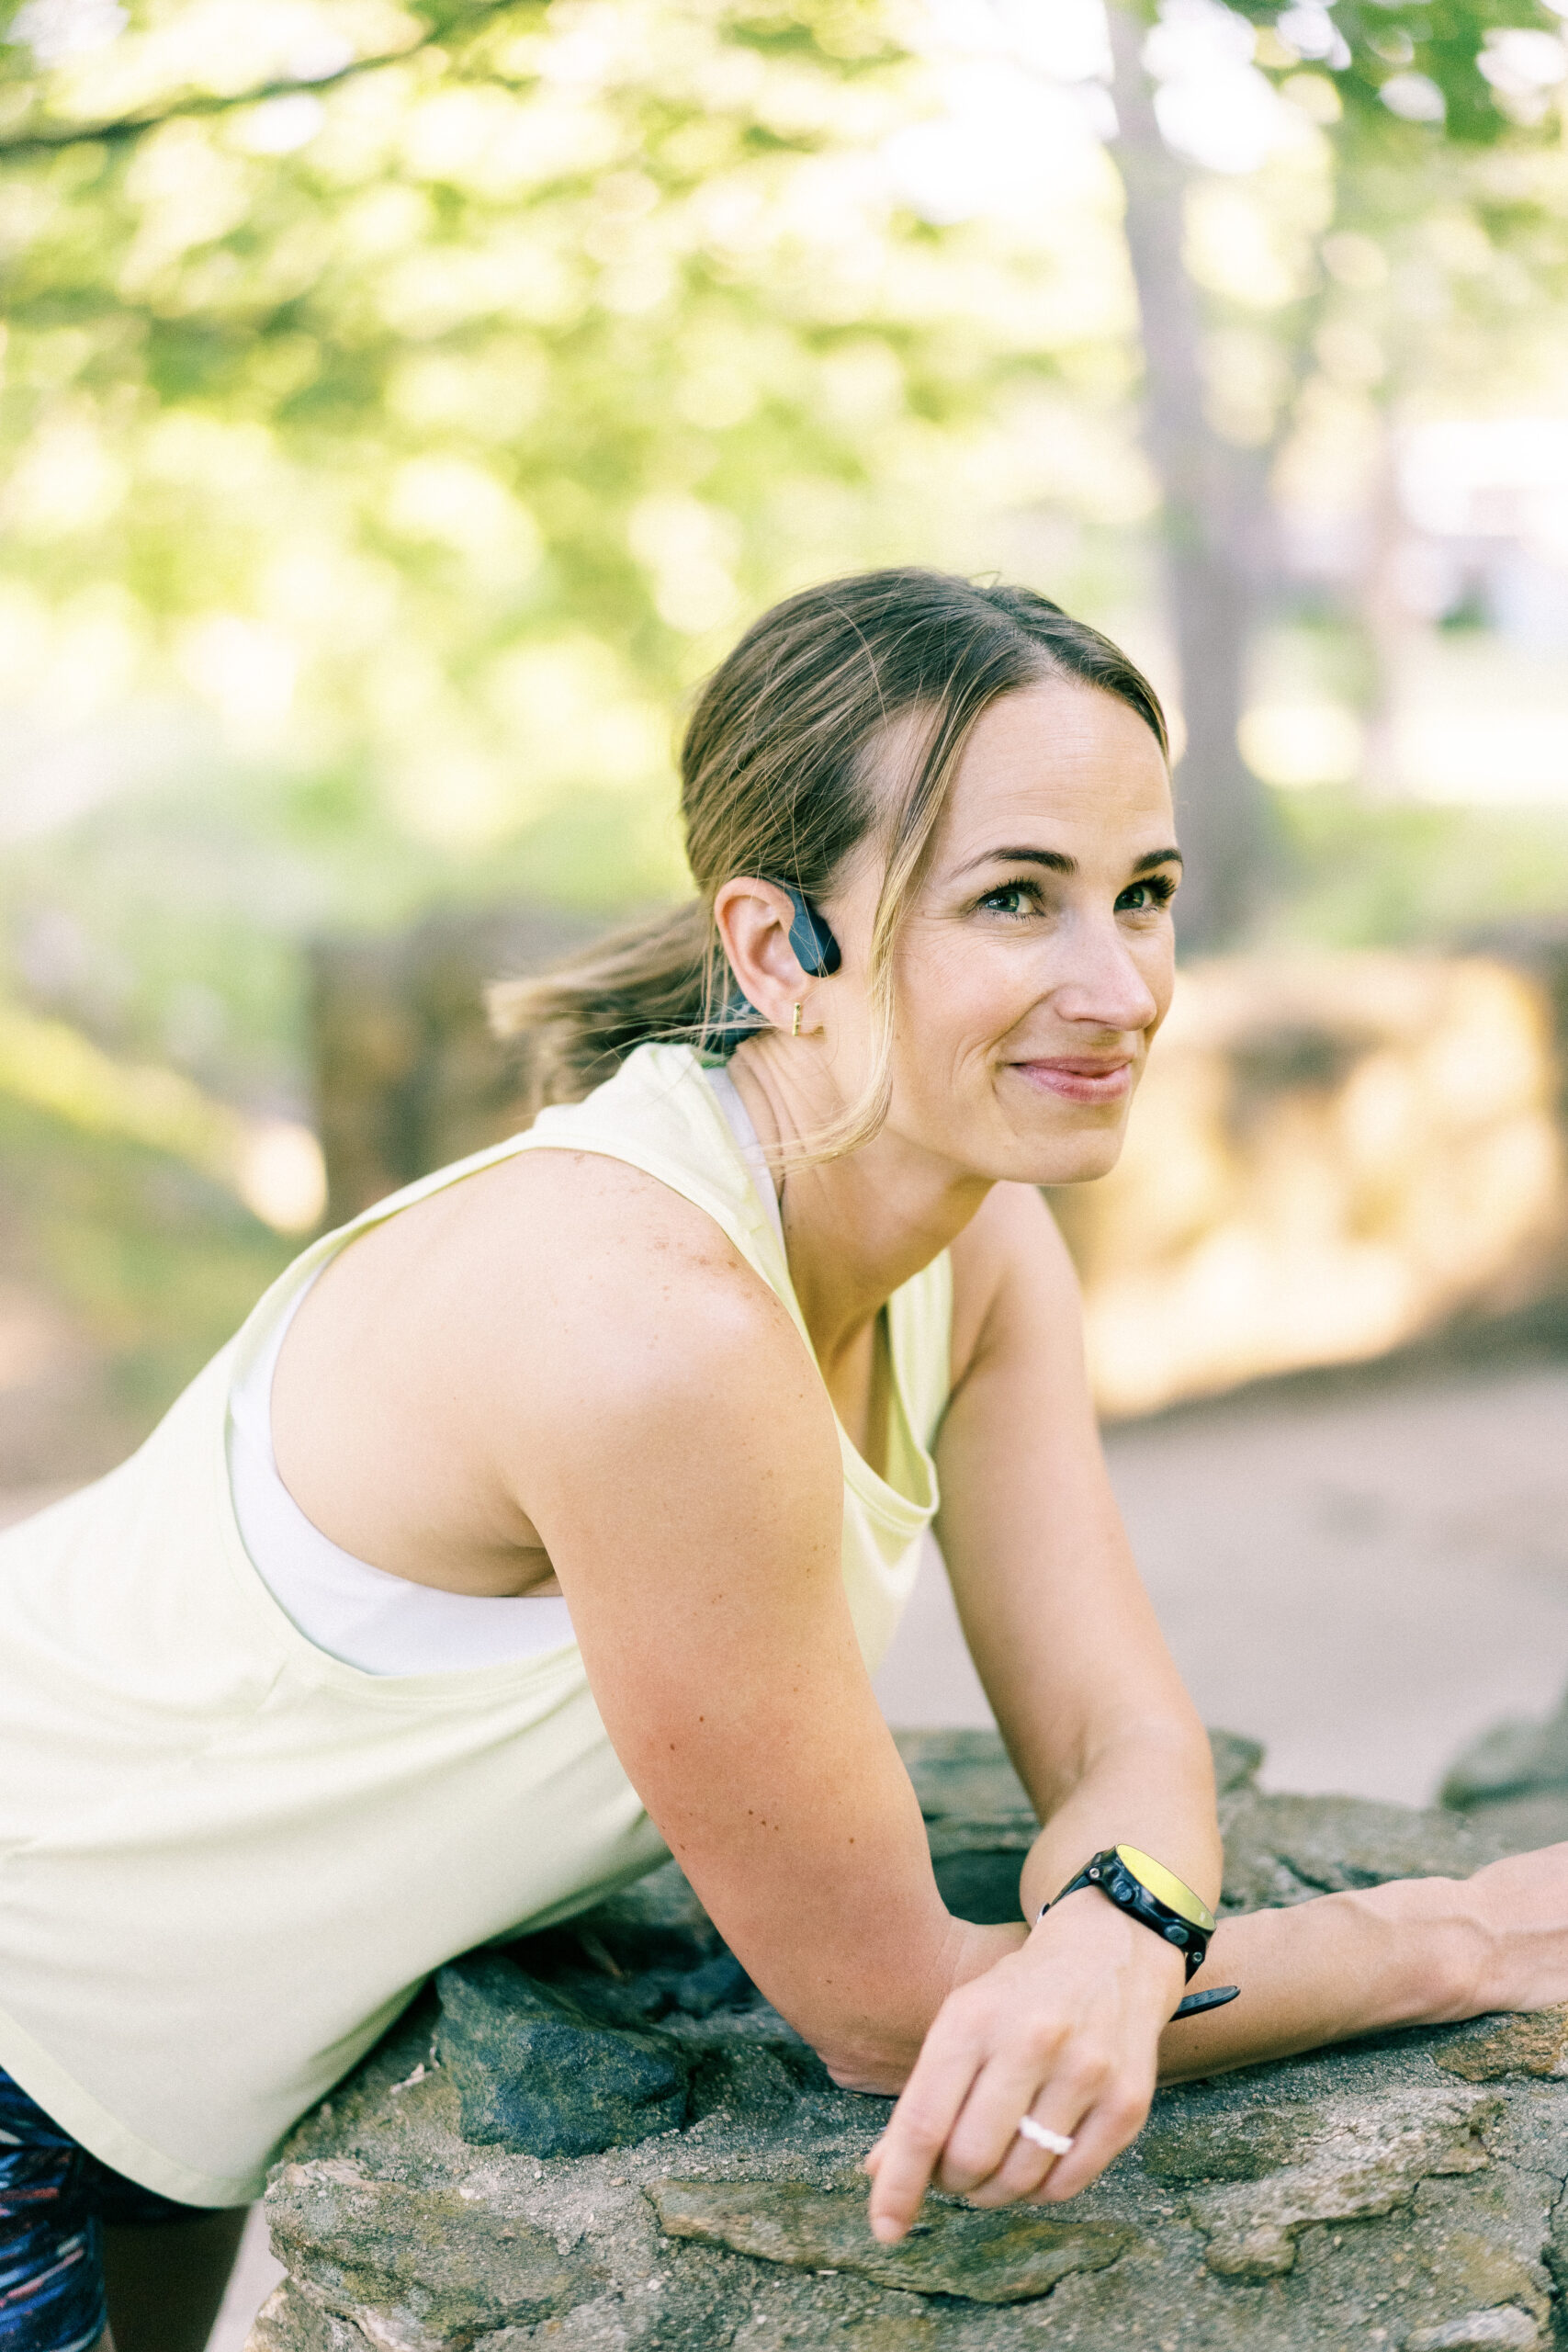 The Best Running Music + My 5 Favorite Playlists